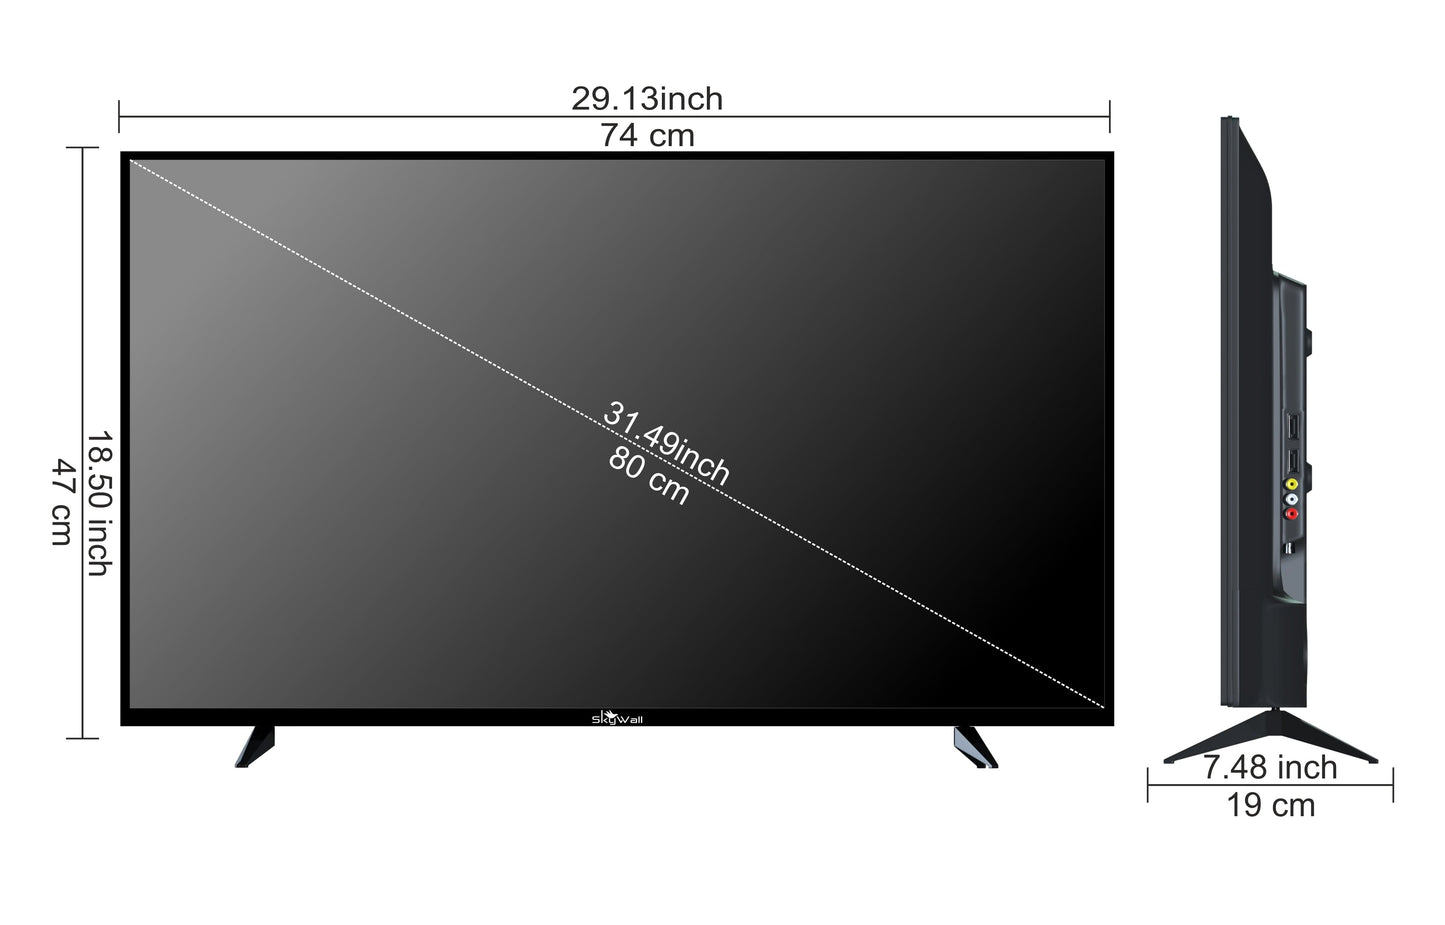 SkyWall™ TV Full HD TV SkyWall 80 cm (32 inches) Full HD Smart Android LED TV 32SWRR Pro (Frameless Edition) (Dolby Audio)